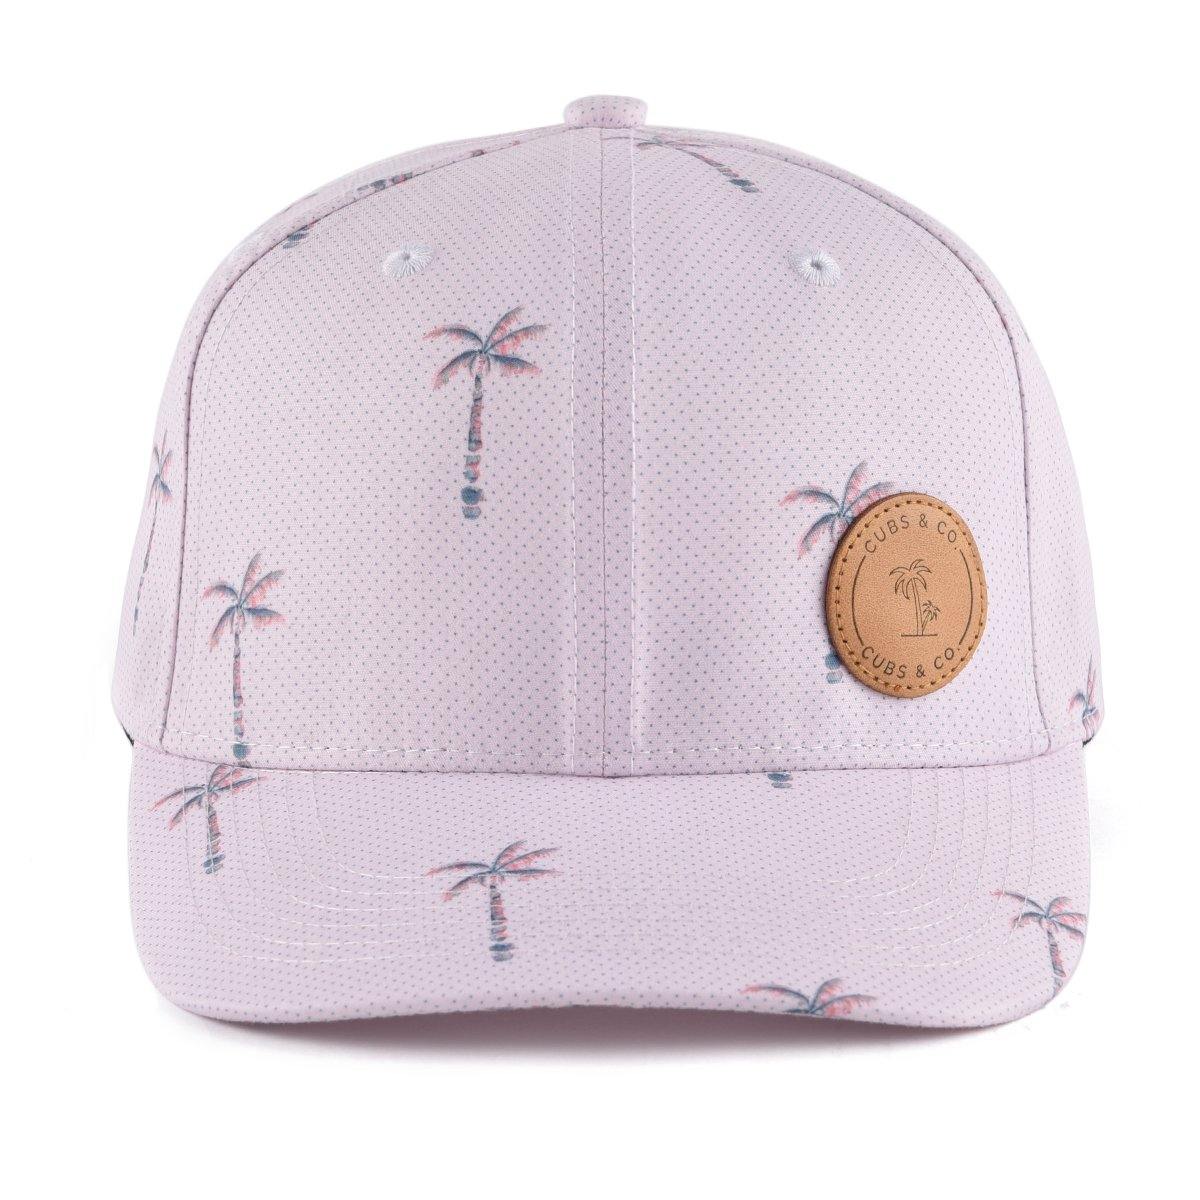 Paradise palm snapback baseball cap for babies, toddlers, kids and women. Cubs & Co. Australia